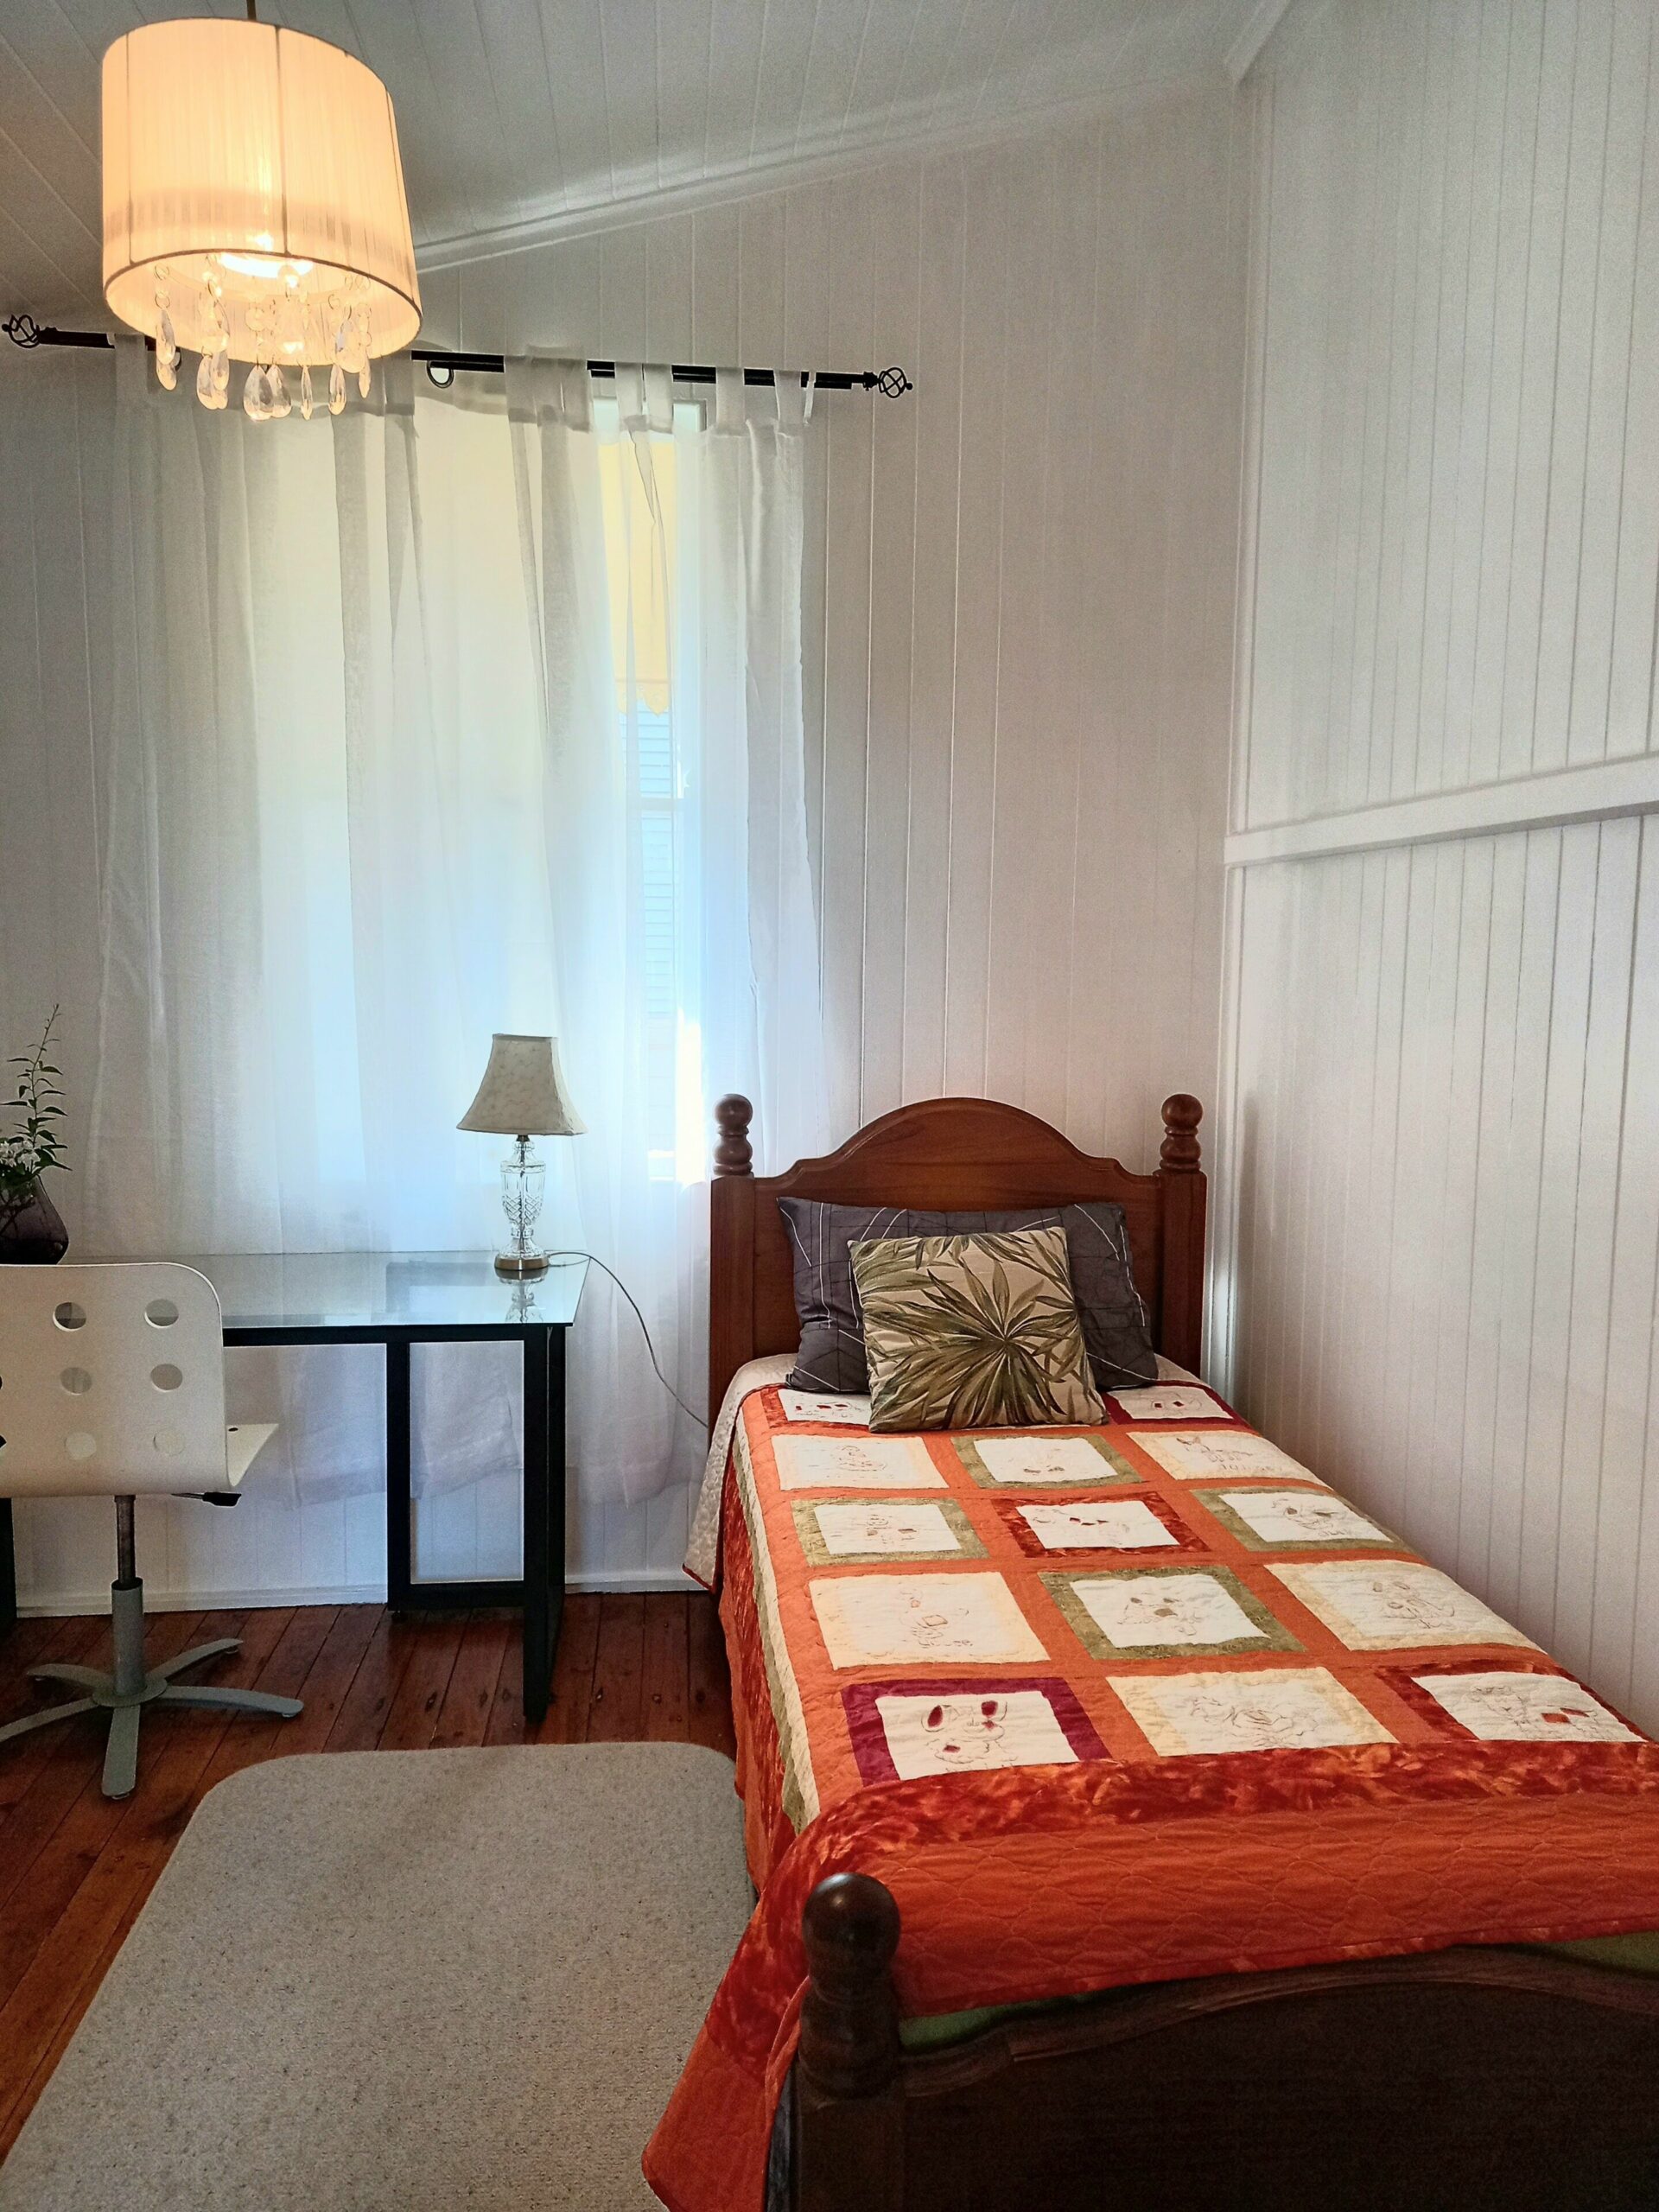 Historical Cottage Near Queens Parknetflix Free Wifistylish Homefree Parking